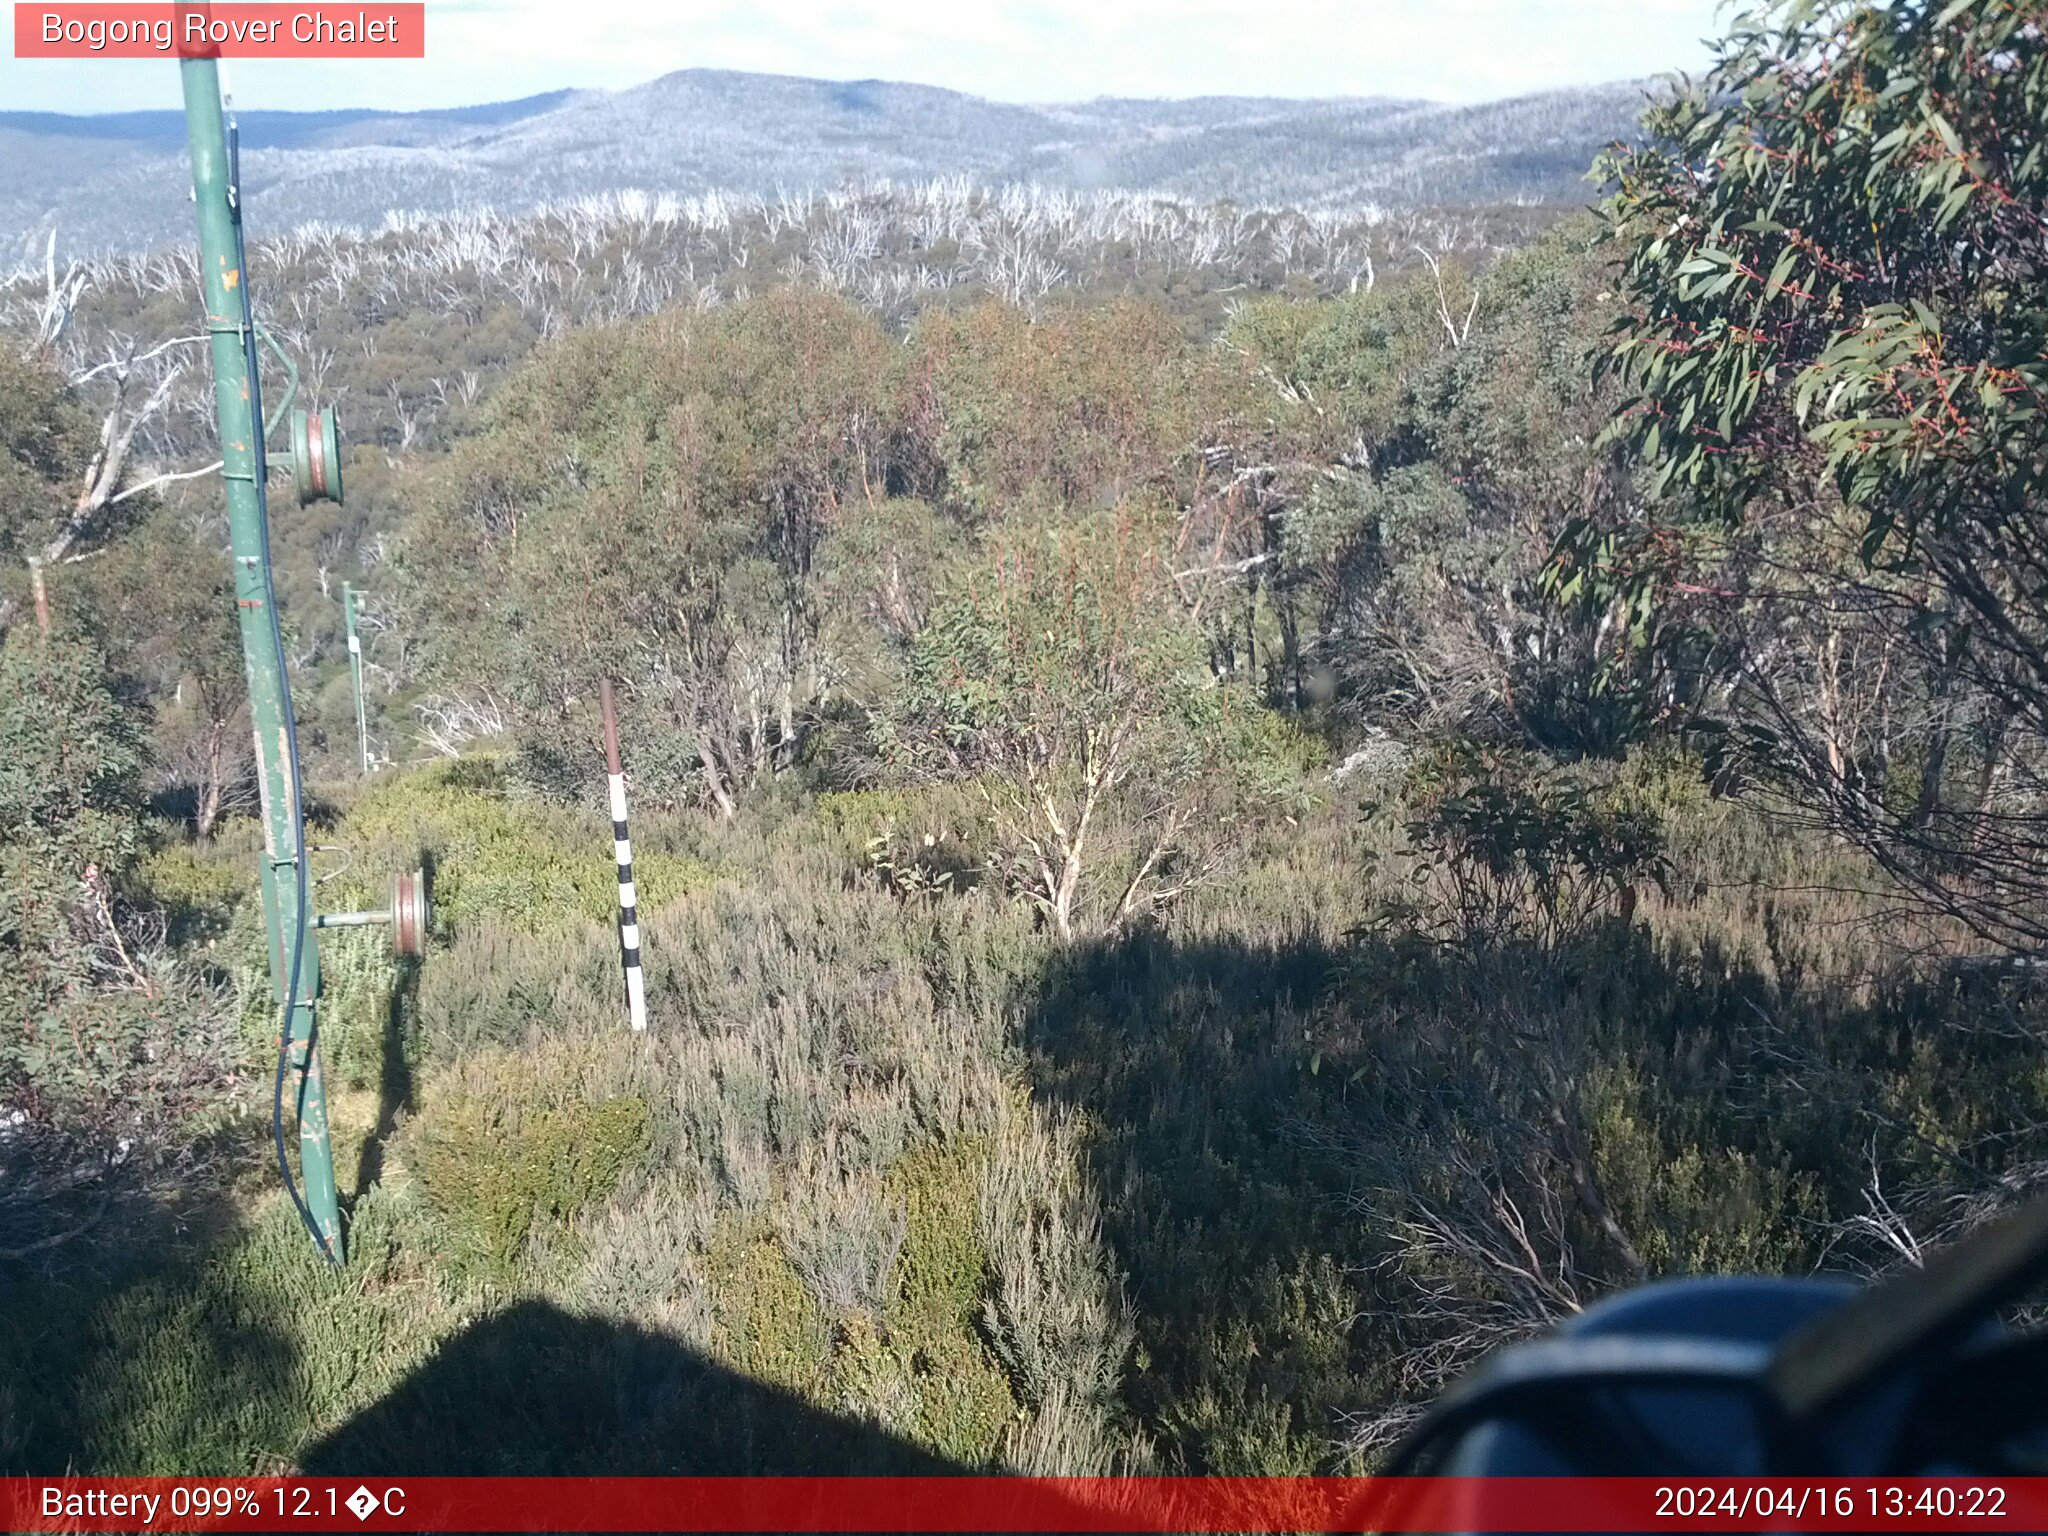 Bogong Web Cam 1:40pm Tuesday 16th of April 2024